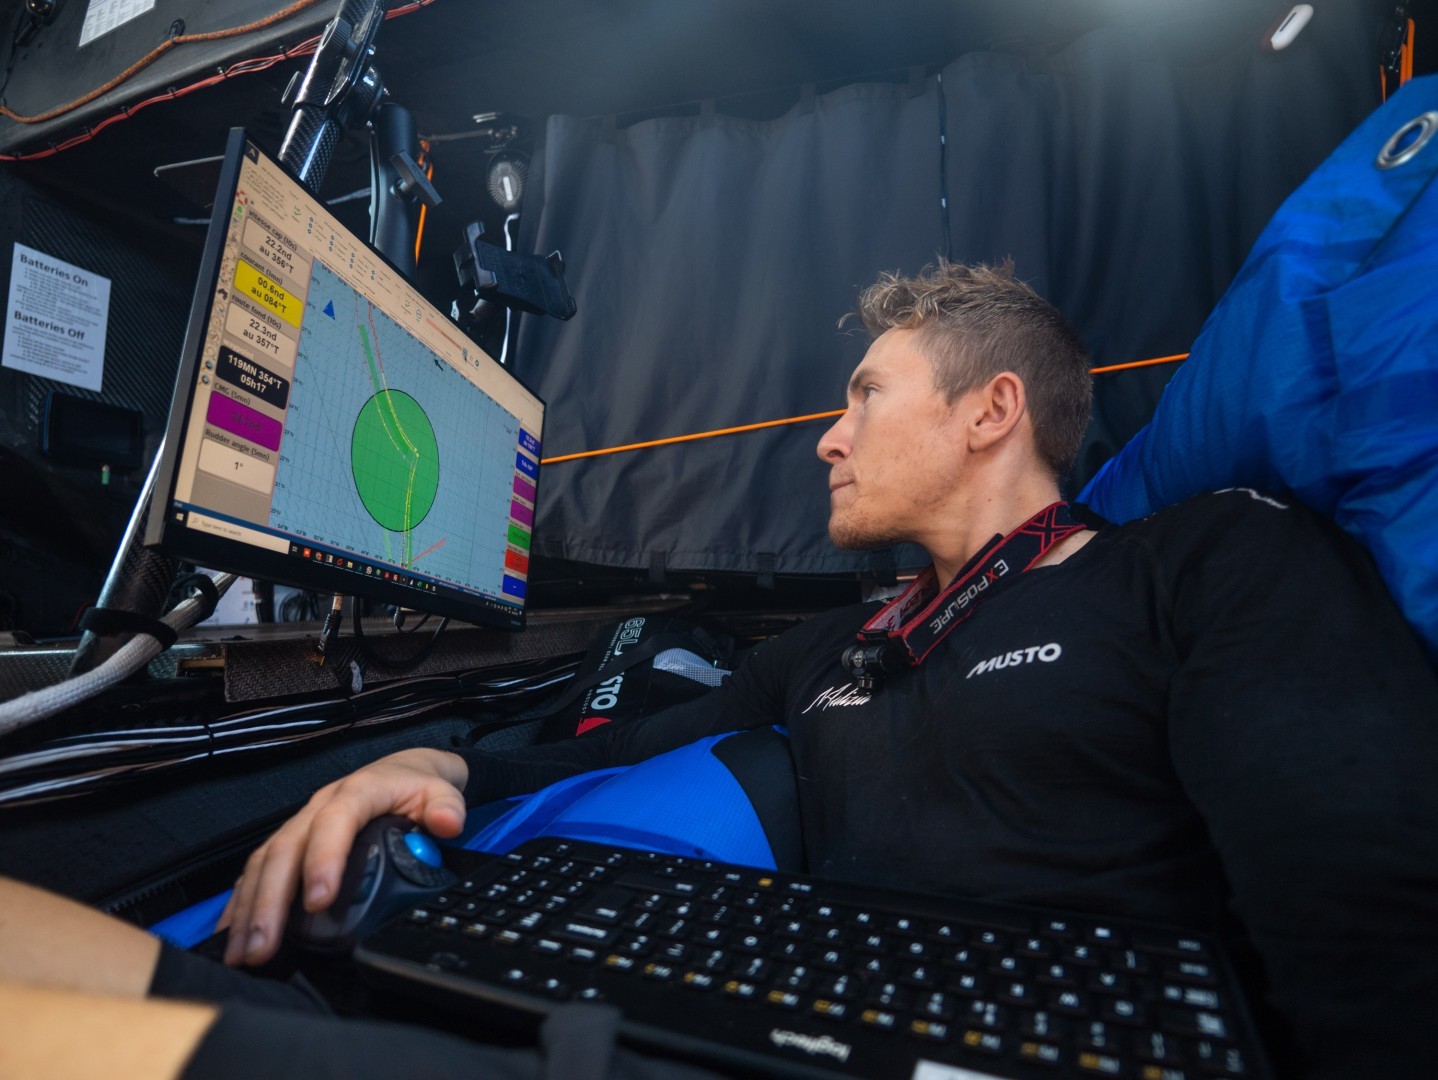 The Ocean Race 2022-23 - 4 May 2023, Leg 4, Day 11 onboard Team Malizia. Skipper Will Harris working on the Nav station.
© Antoine Auriol / Team Malizia / The Ocean Race